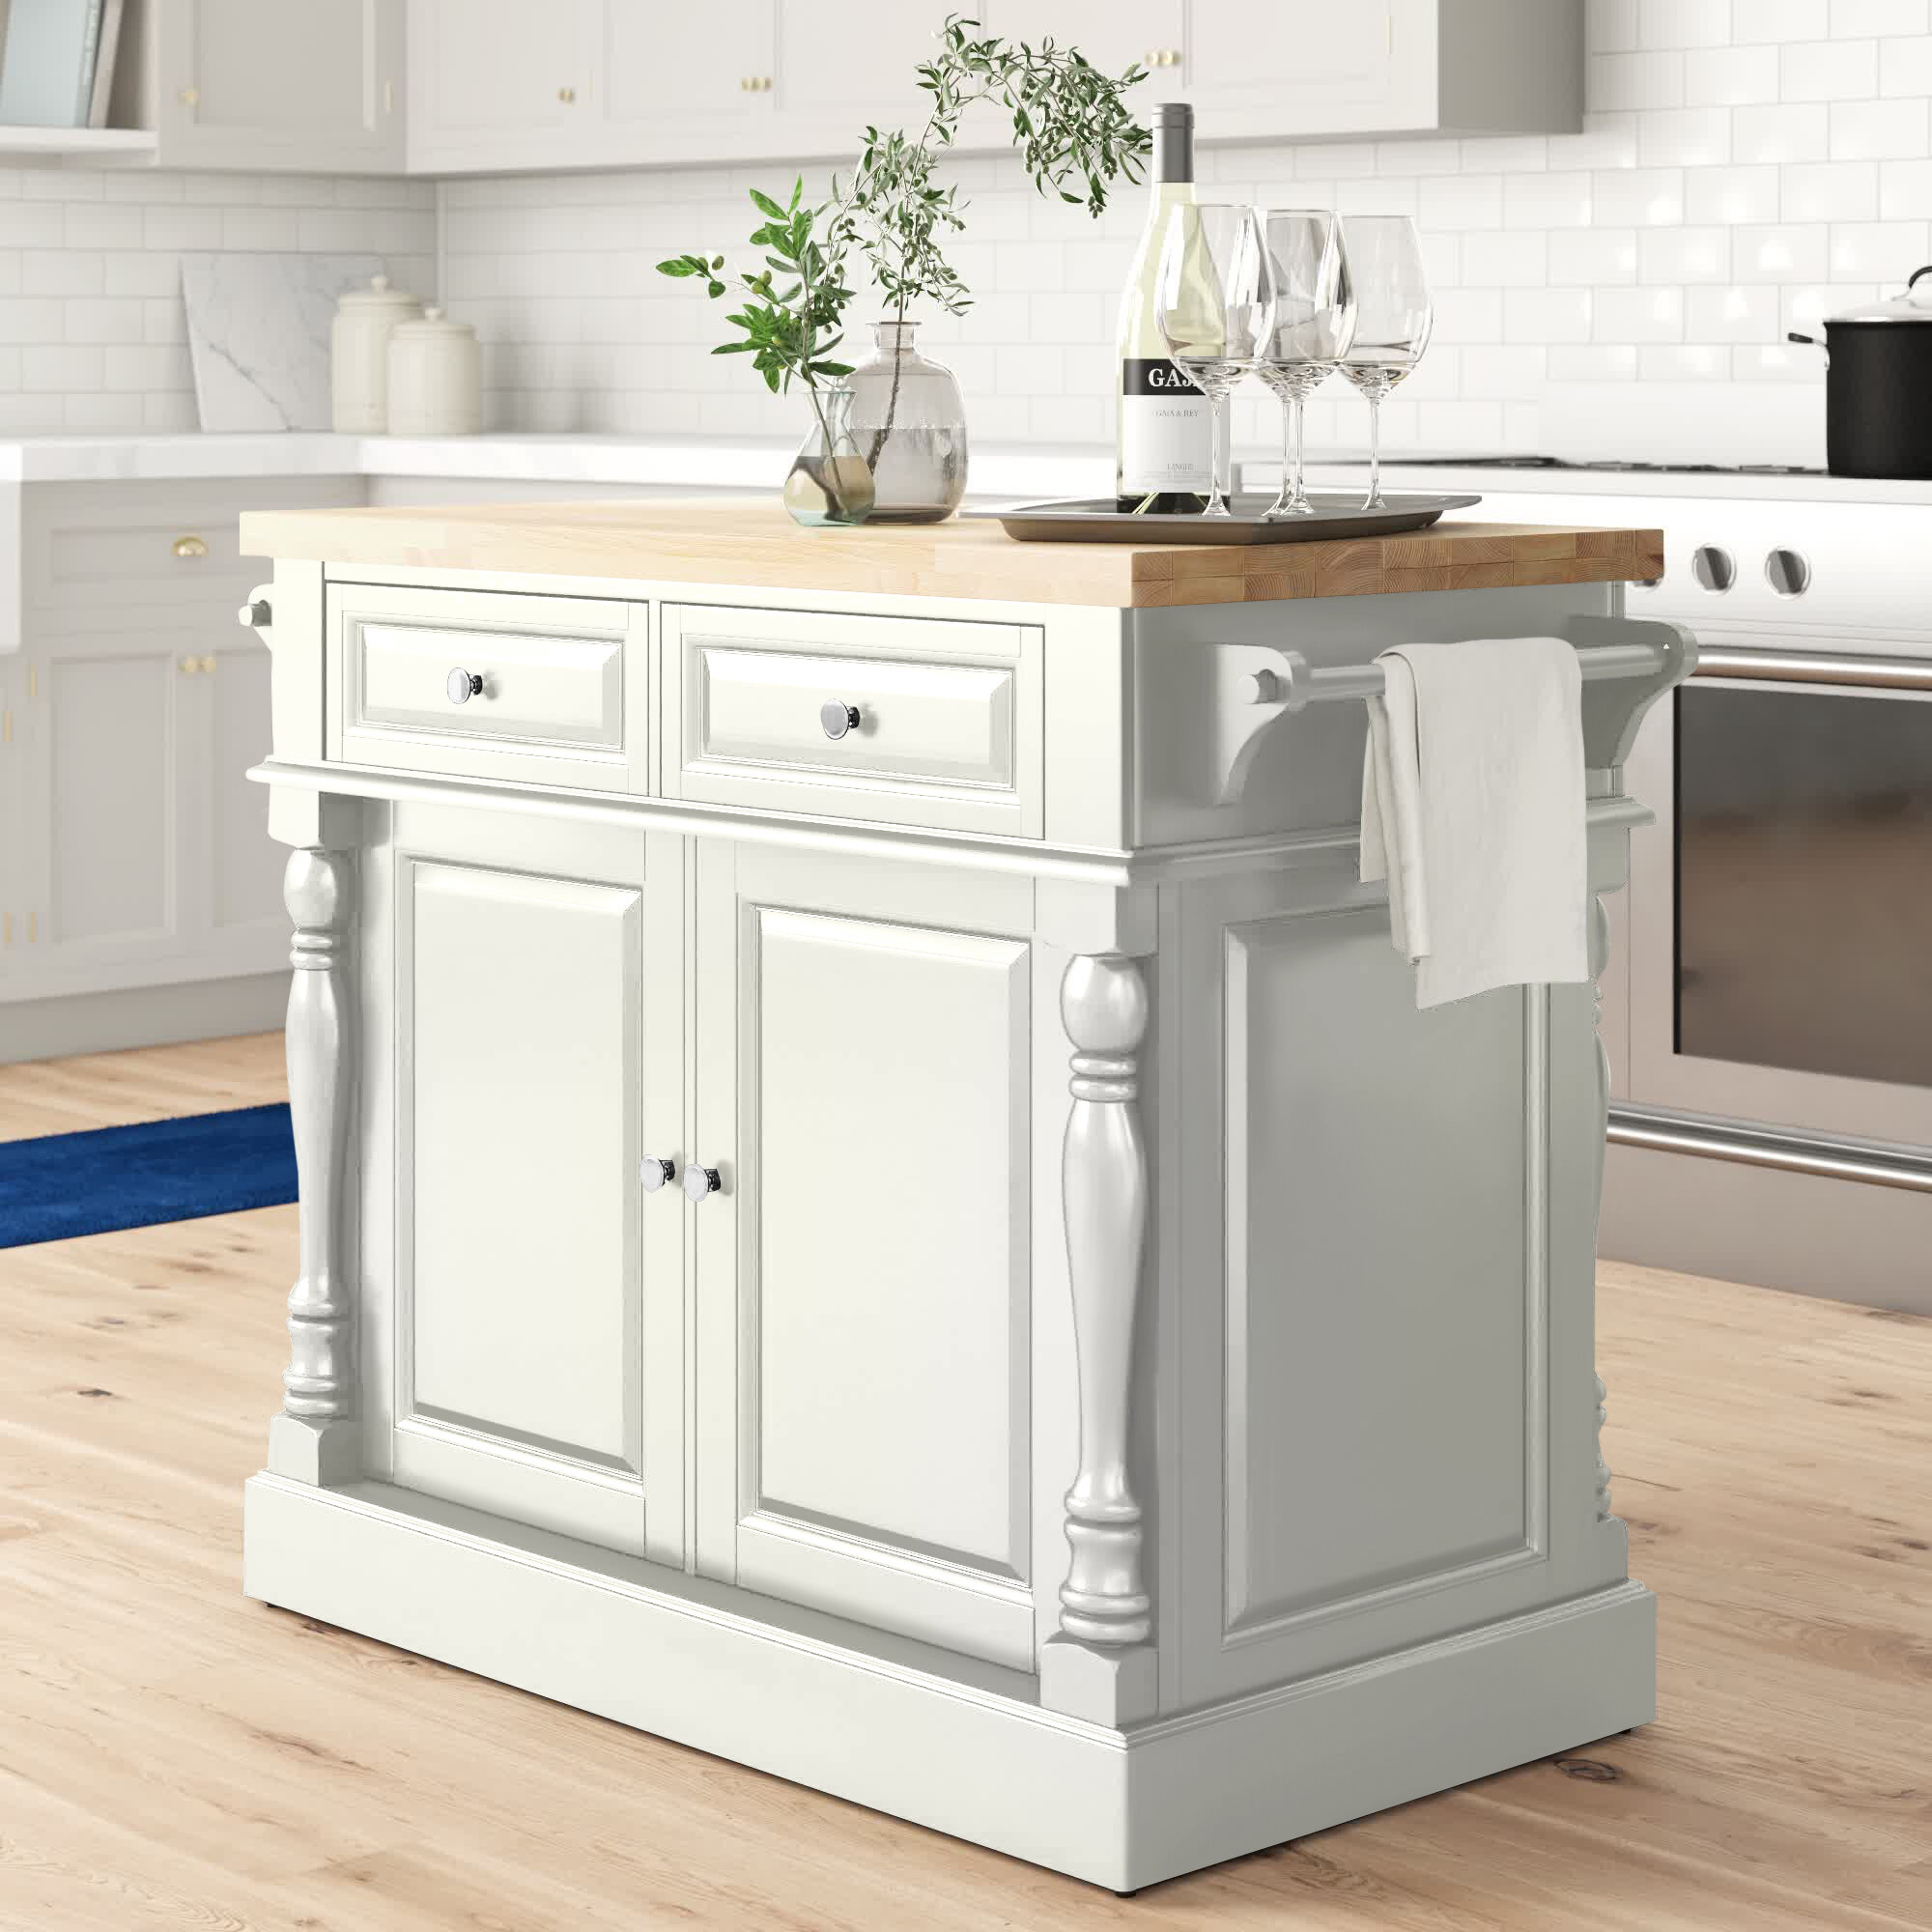 Are Butcher-Block Islands in Style?